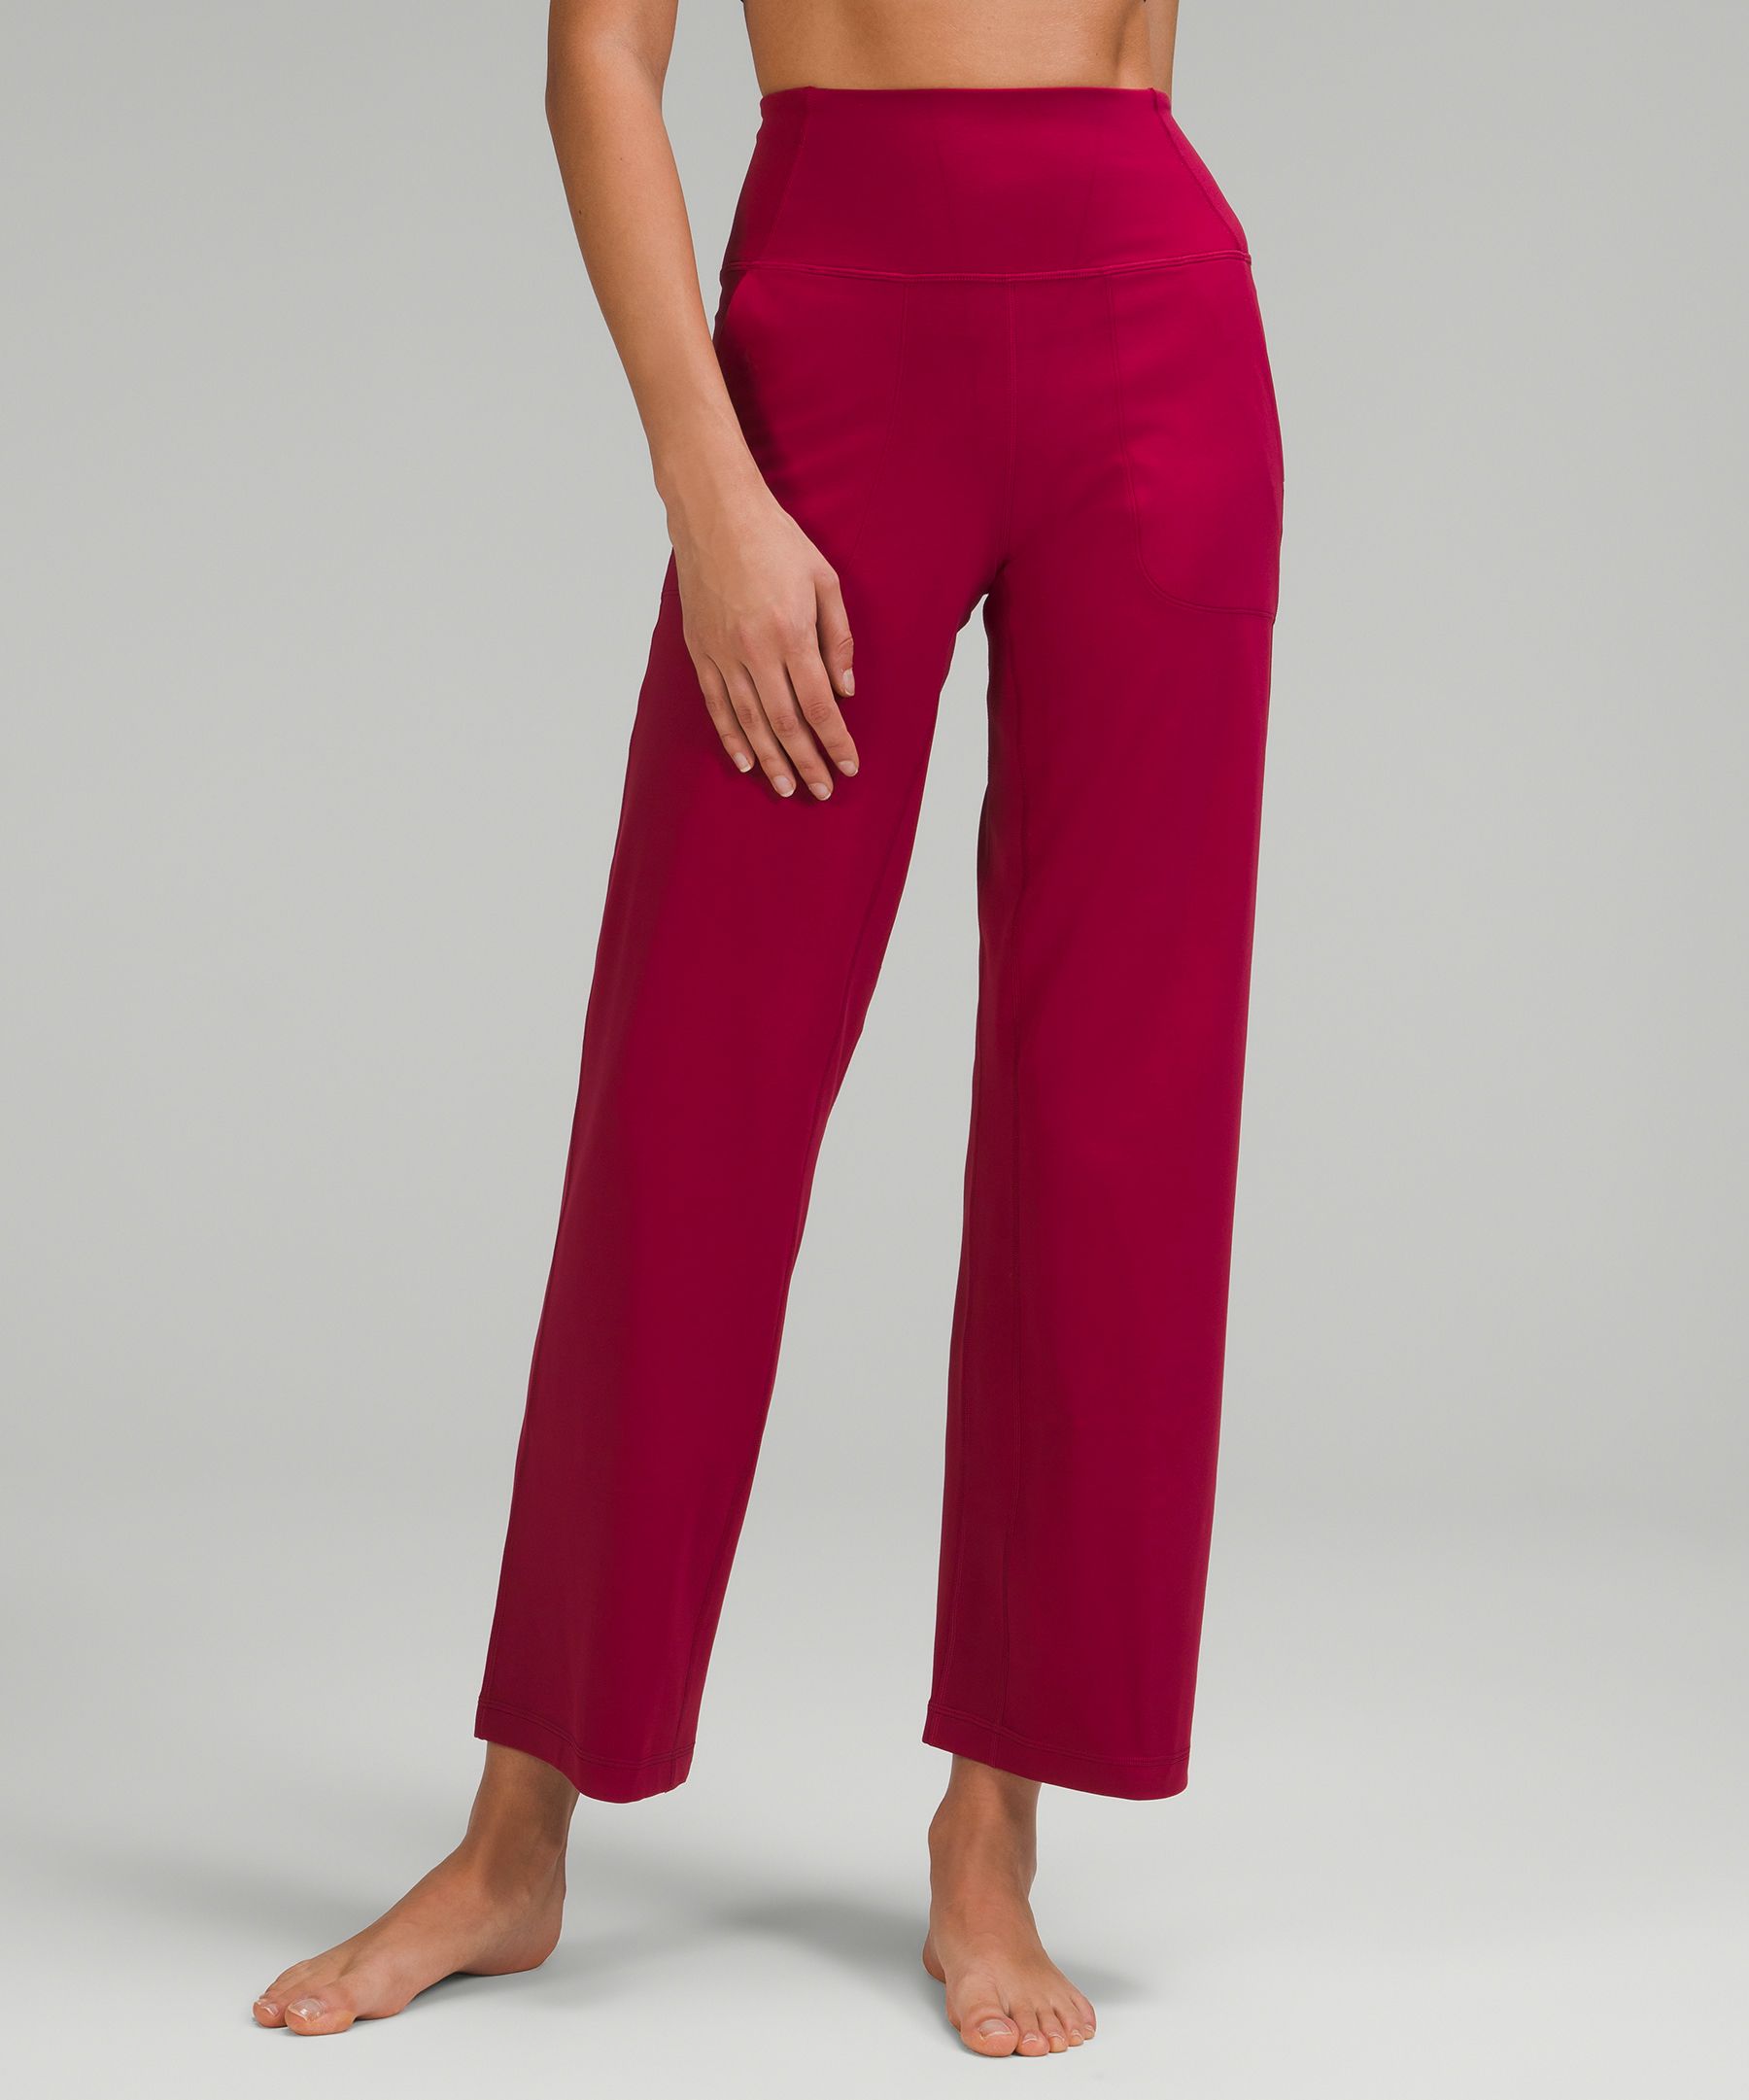 Align high rise wide leg pant, short. I think I'm late to the